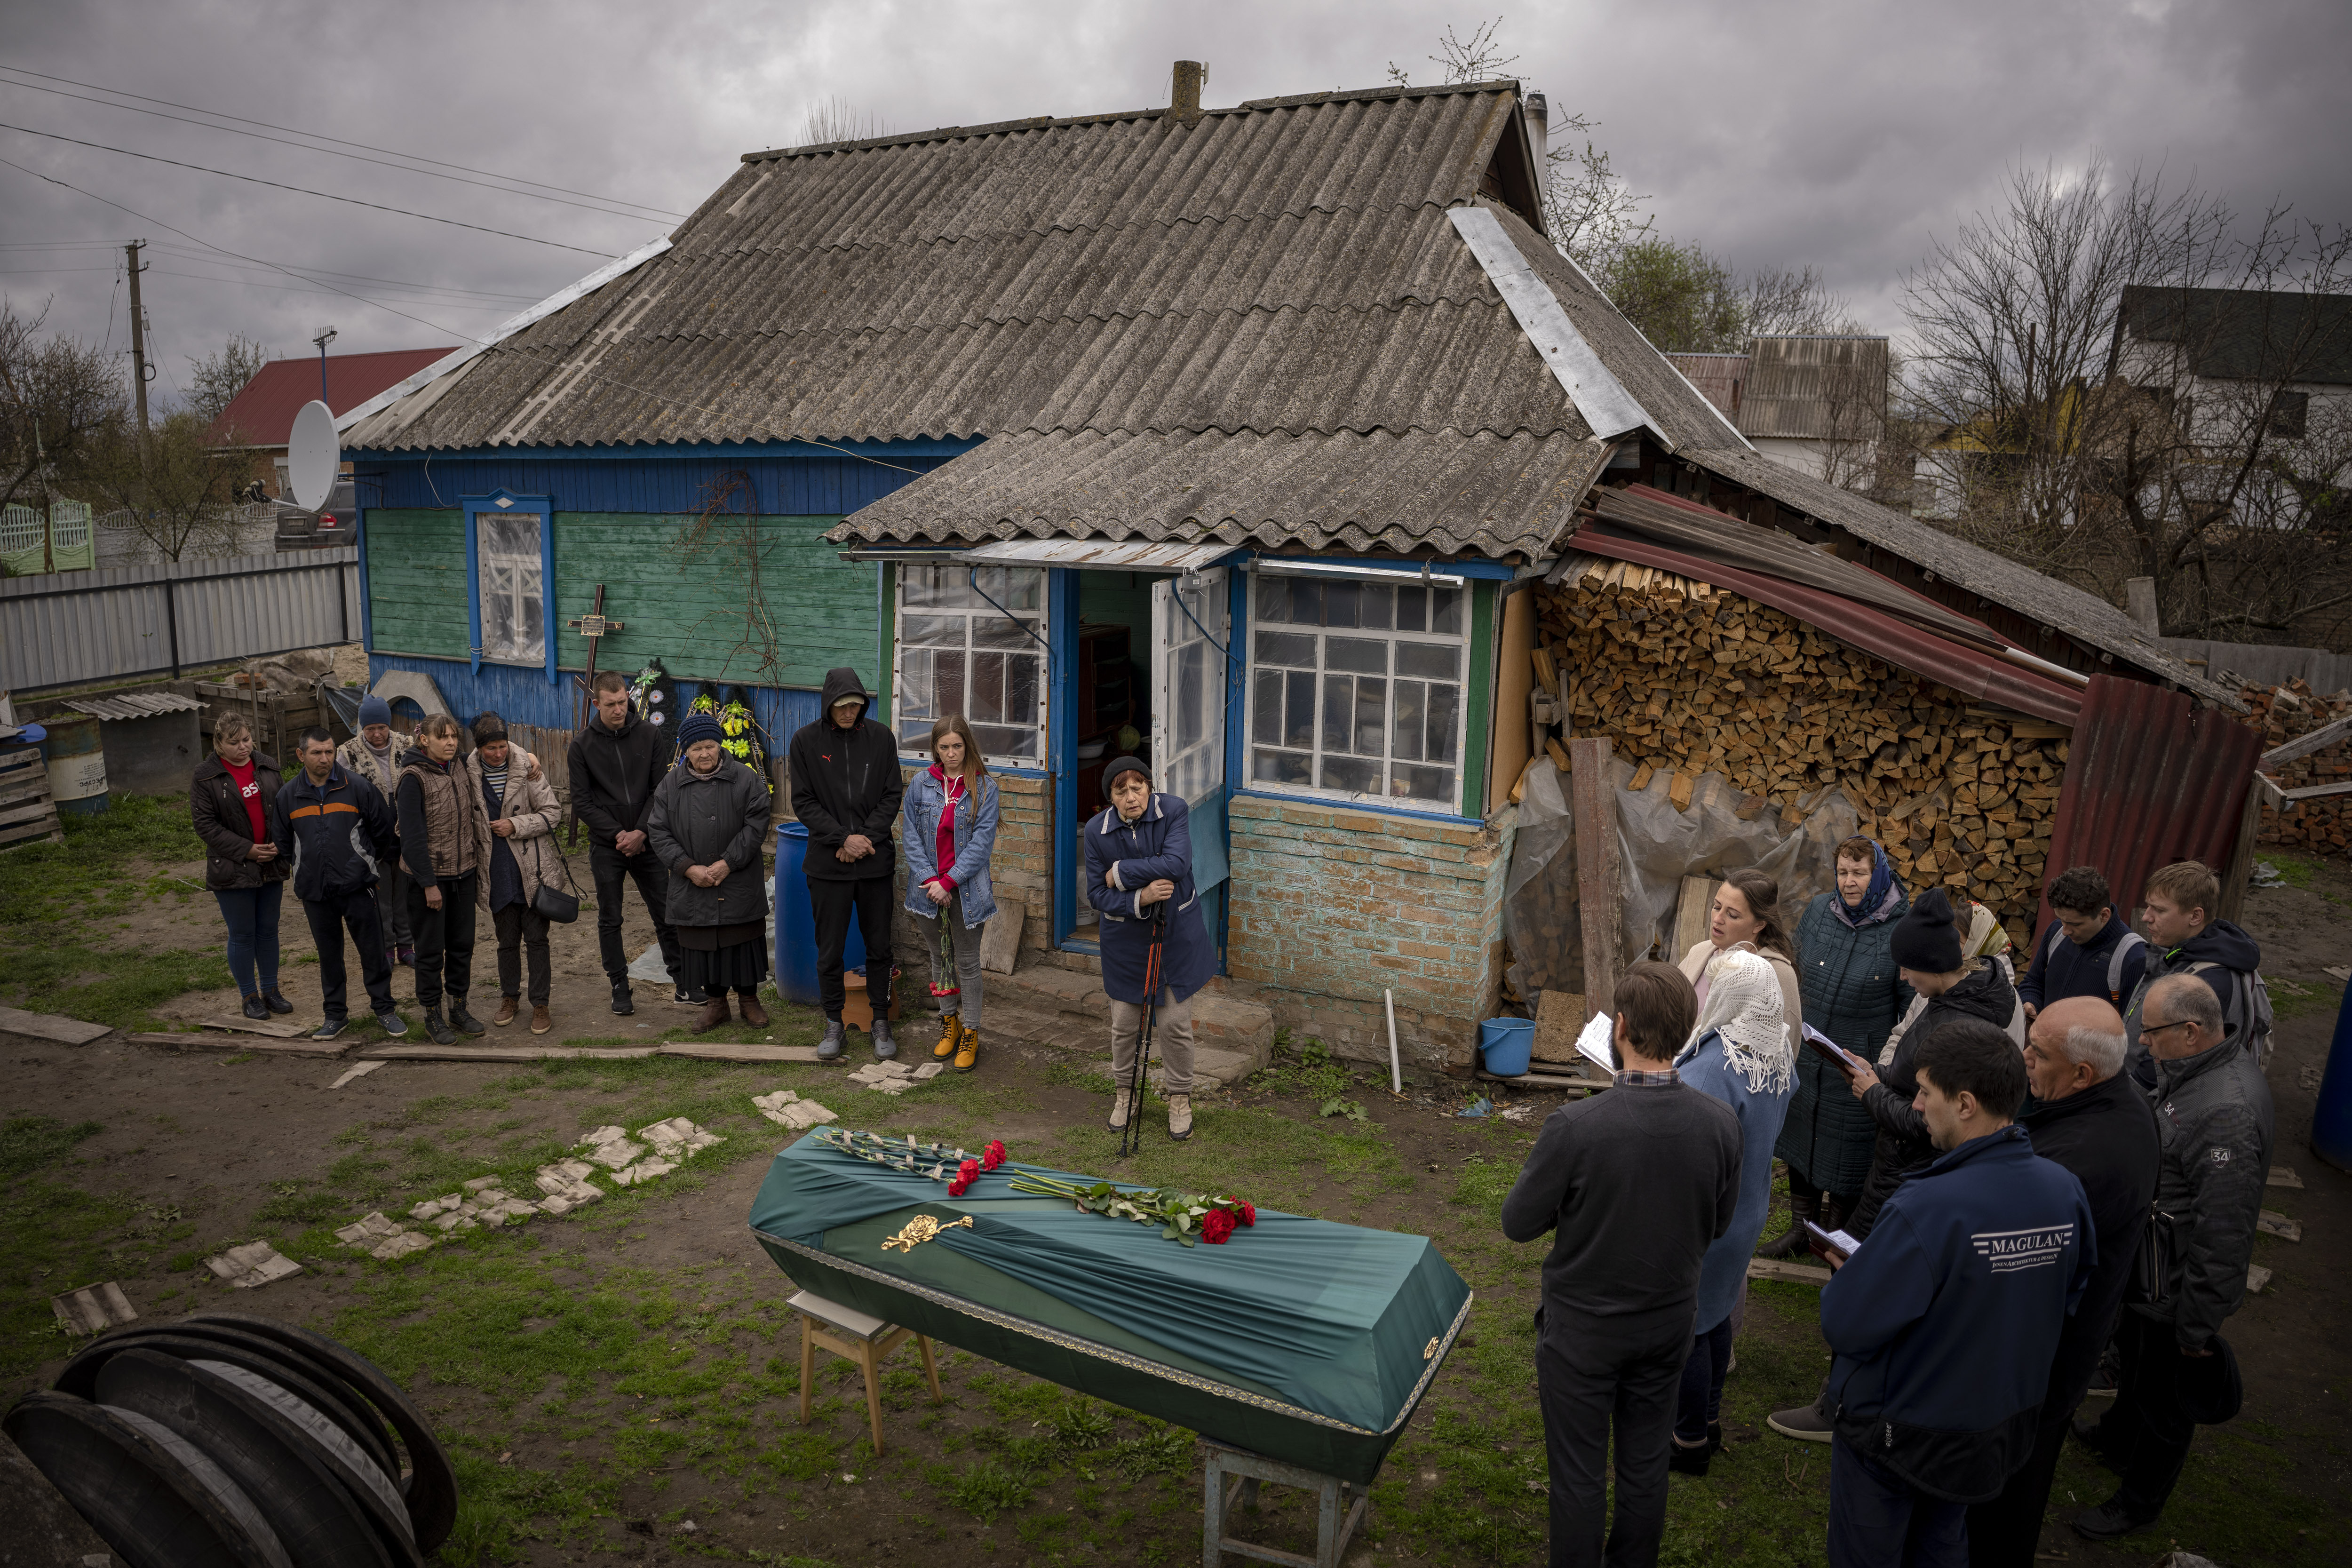 Relatives of Mykola Moroz, 47, gather during a funeral service at his home at the Ozera village, near Bucha, Ukraine, on April 26.  